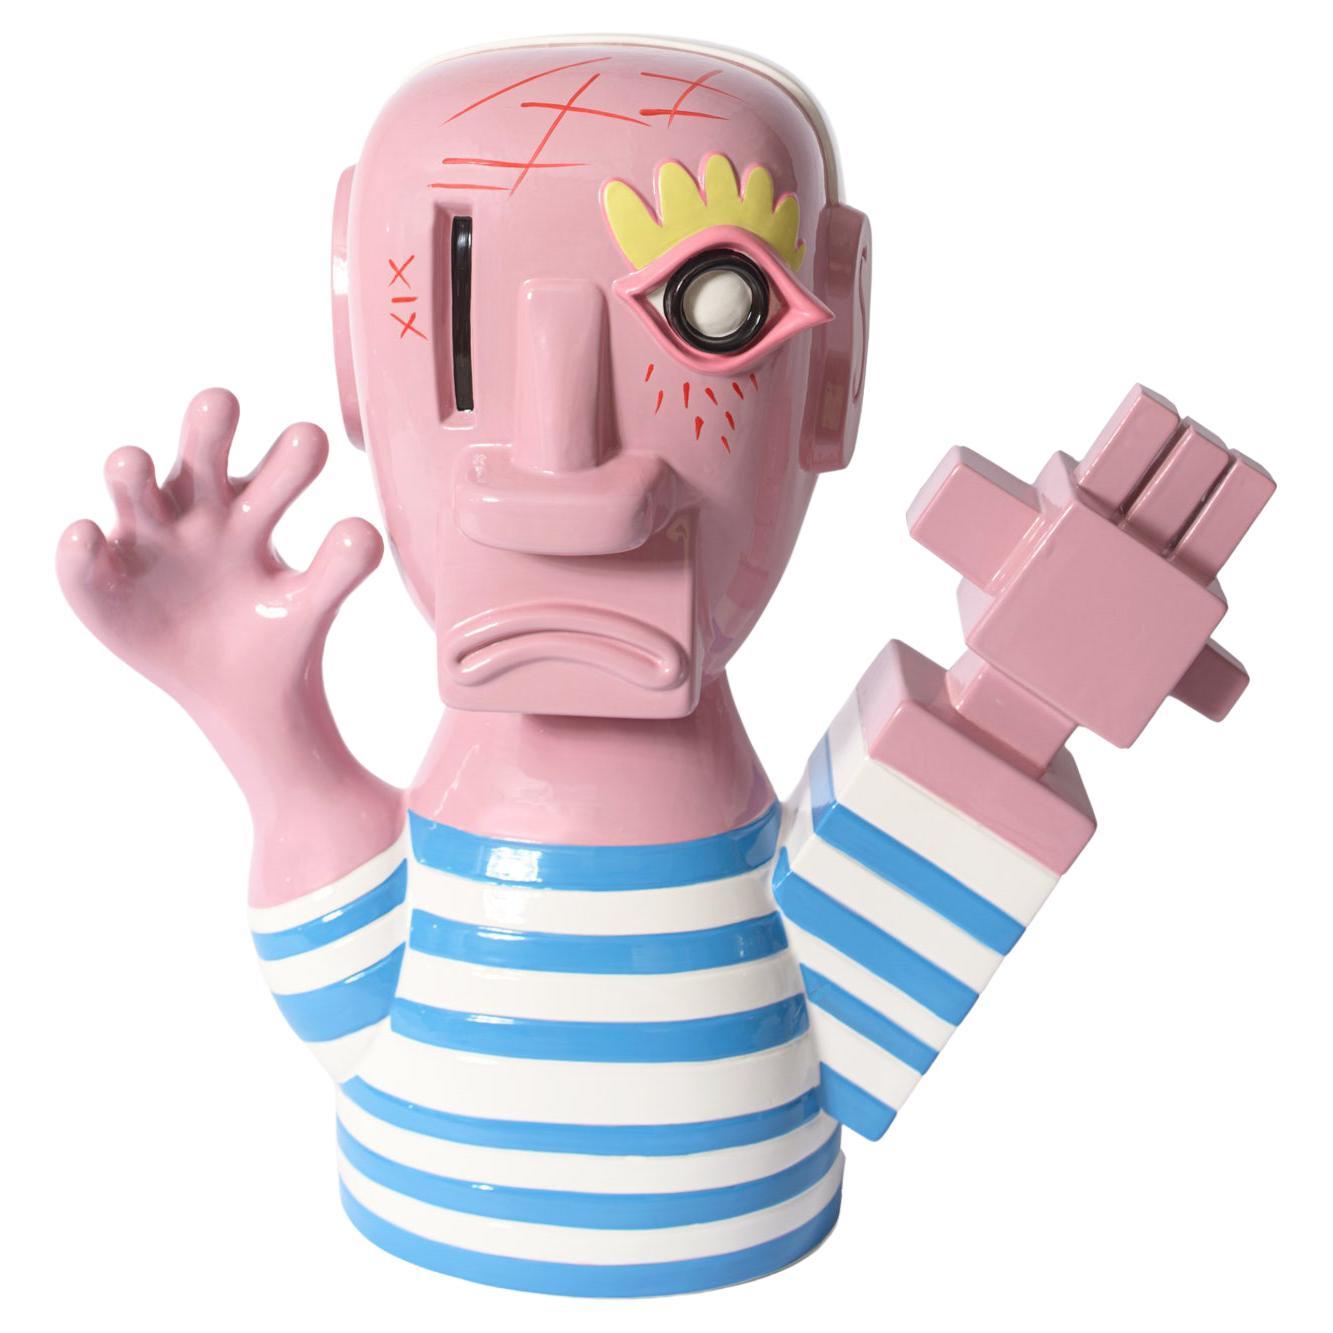 Pablo Ceramic Sculpture by Massimo Giacon for Superego Editions, Italy